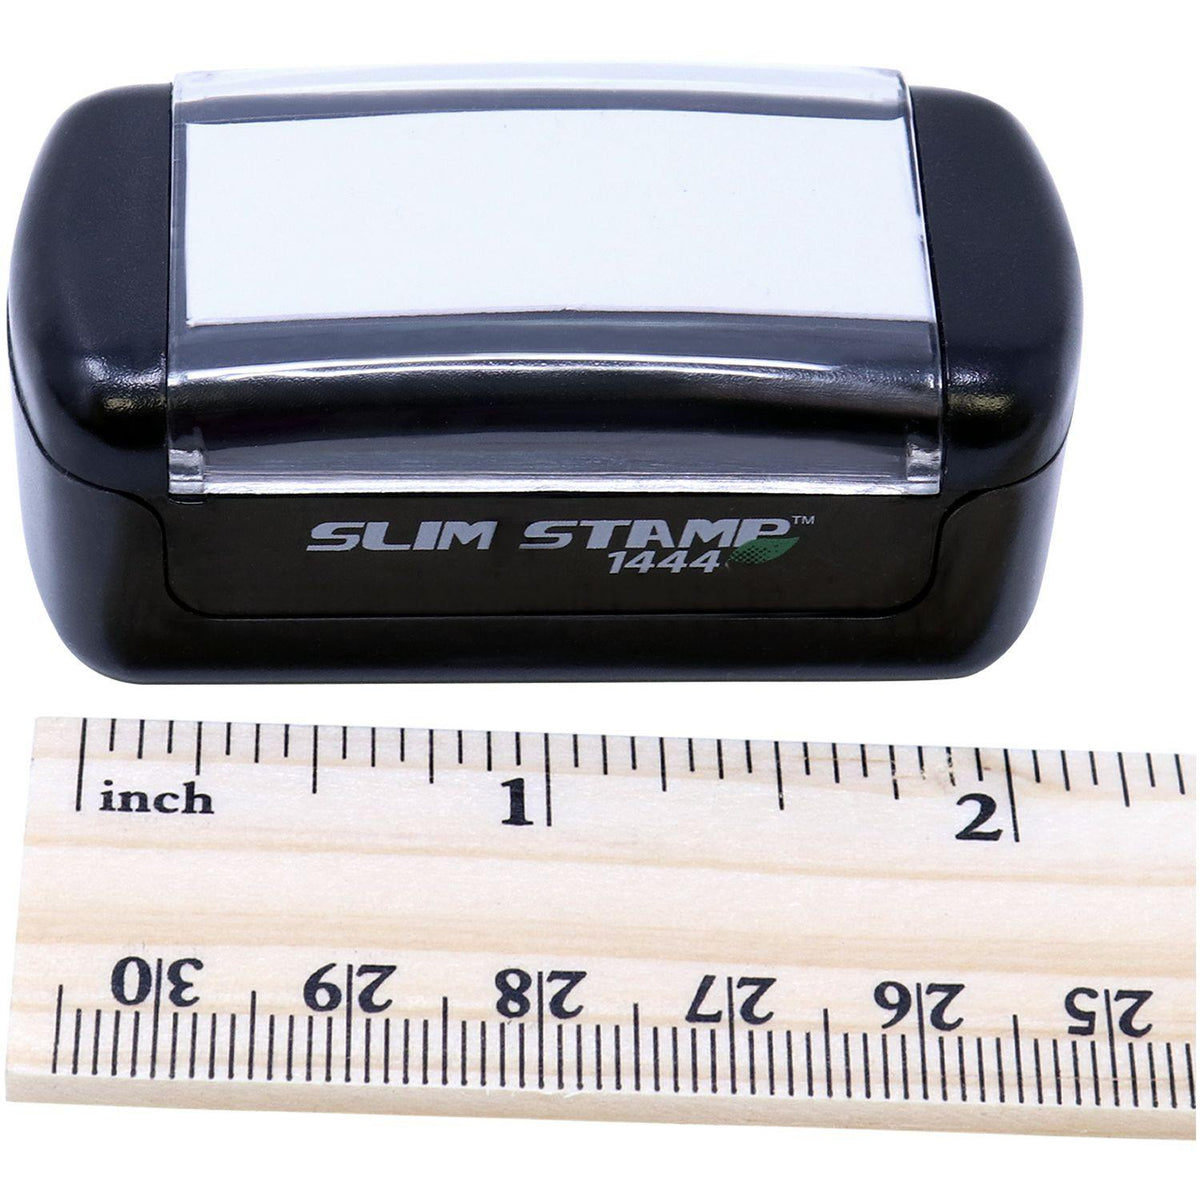 Measurement Slim Pre-Inked Courtesy Copy Original Filed Electronically Stamp with Ruler